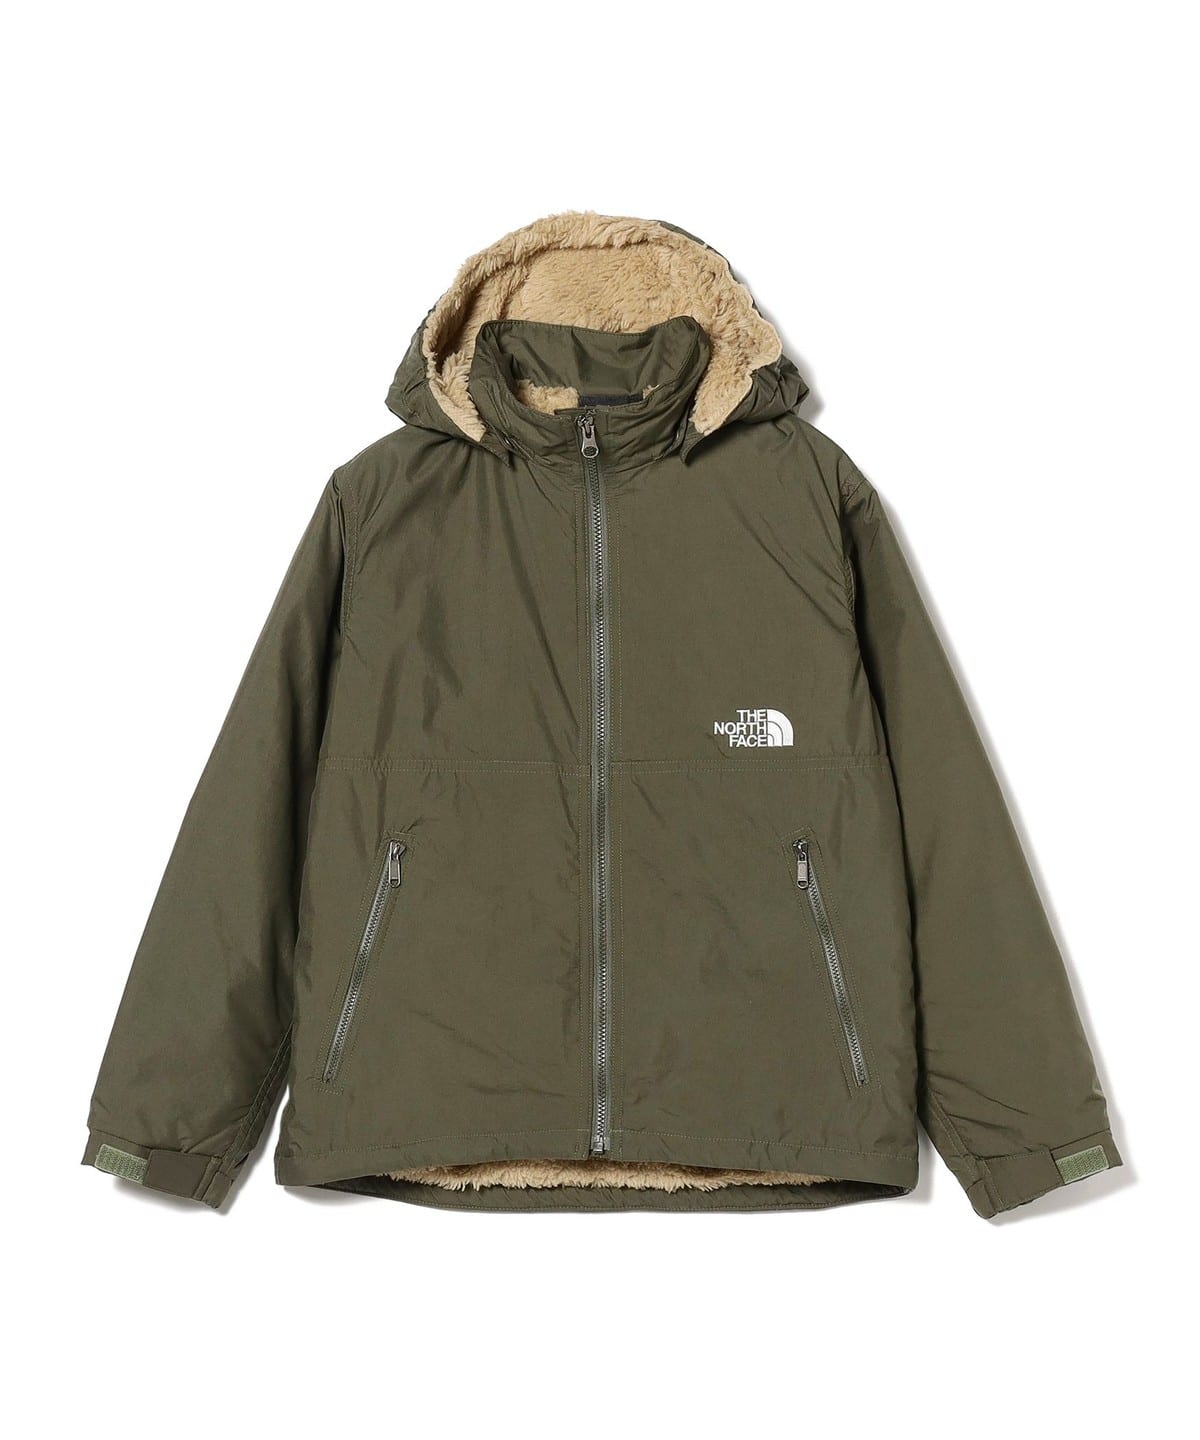 THE NORTH FACE ノマドジャケット100♪